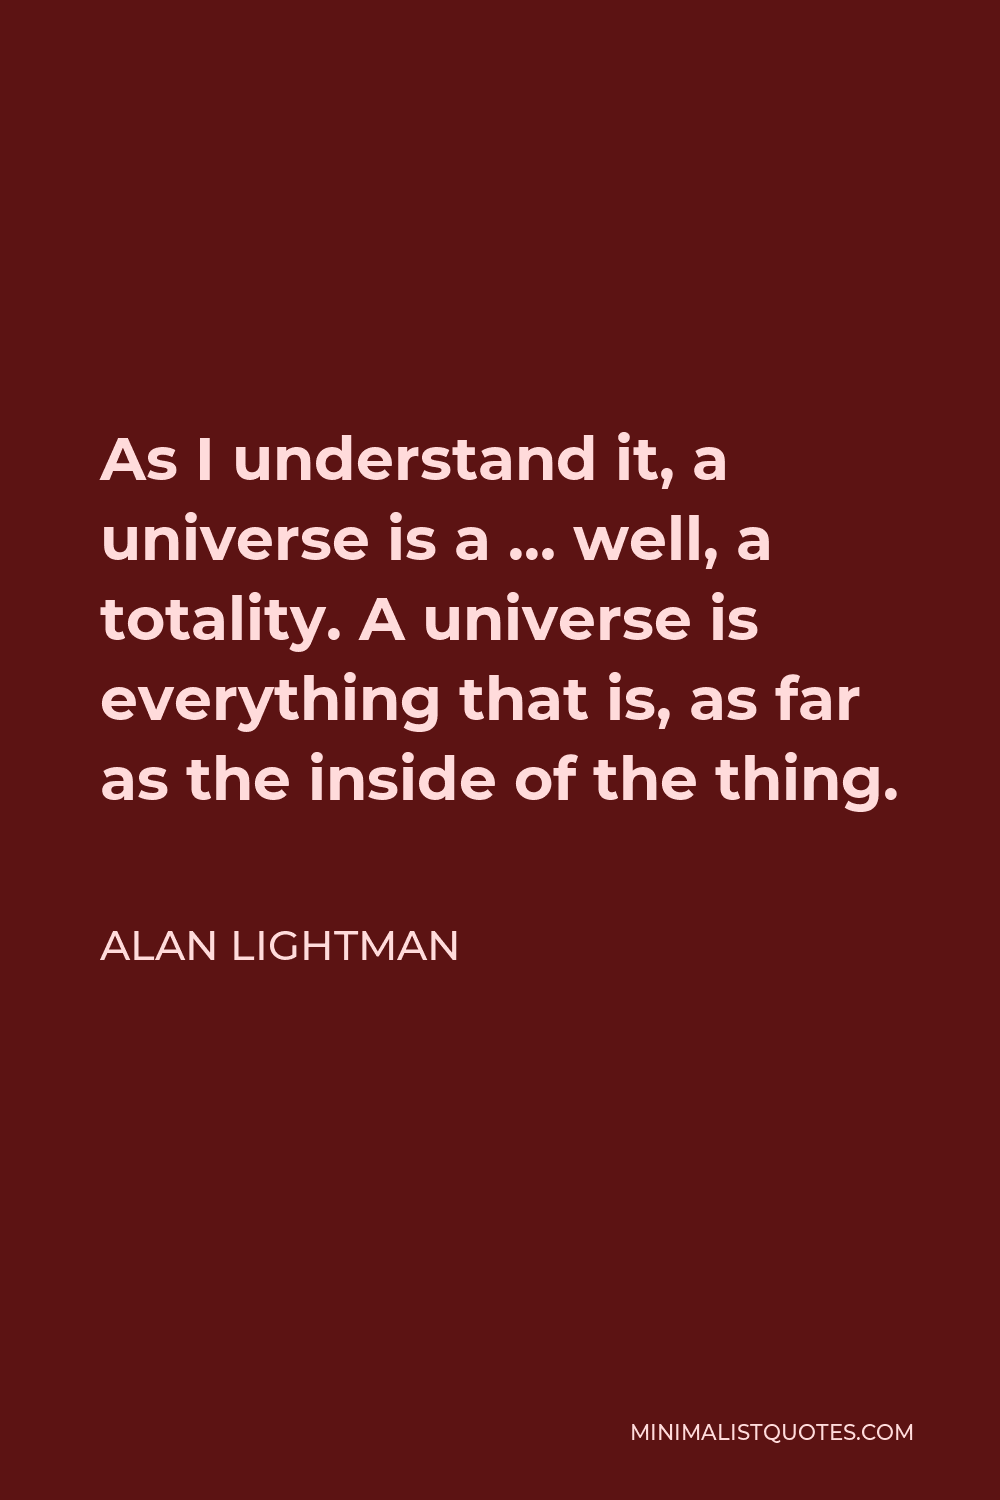 Alan Lightman Quote - As I understand it, a universe is a … well, a totality. A universe is everything that is, as far as the inside of the thing.